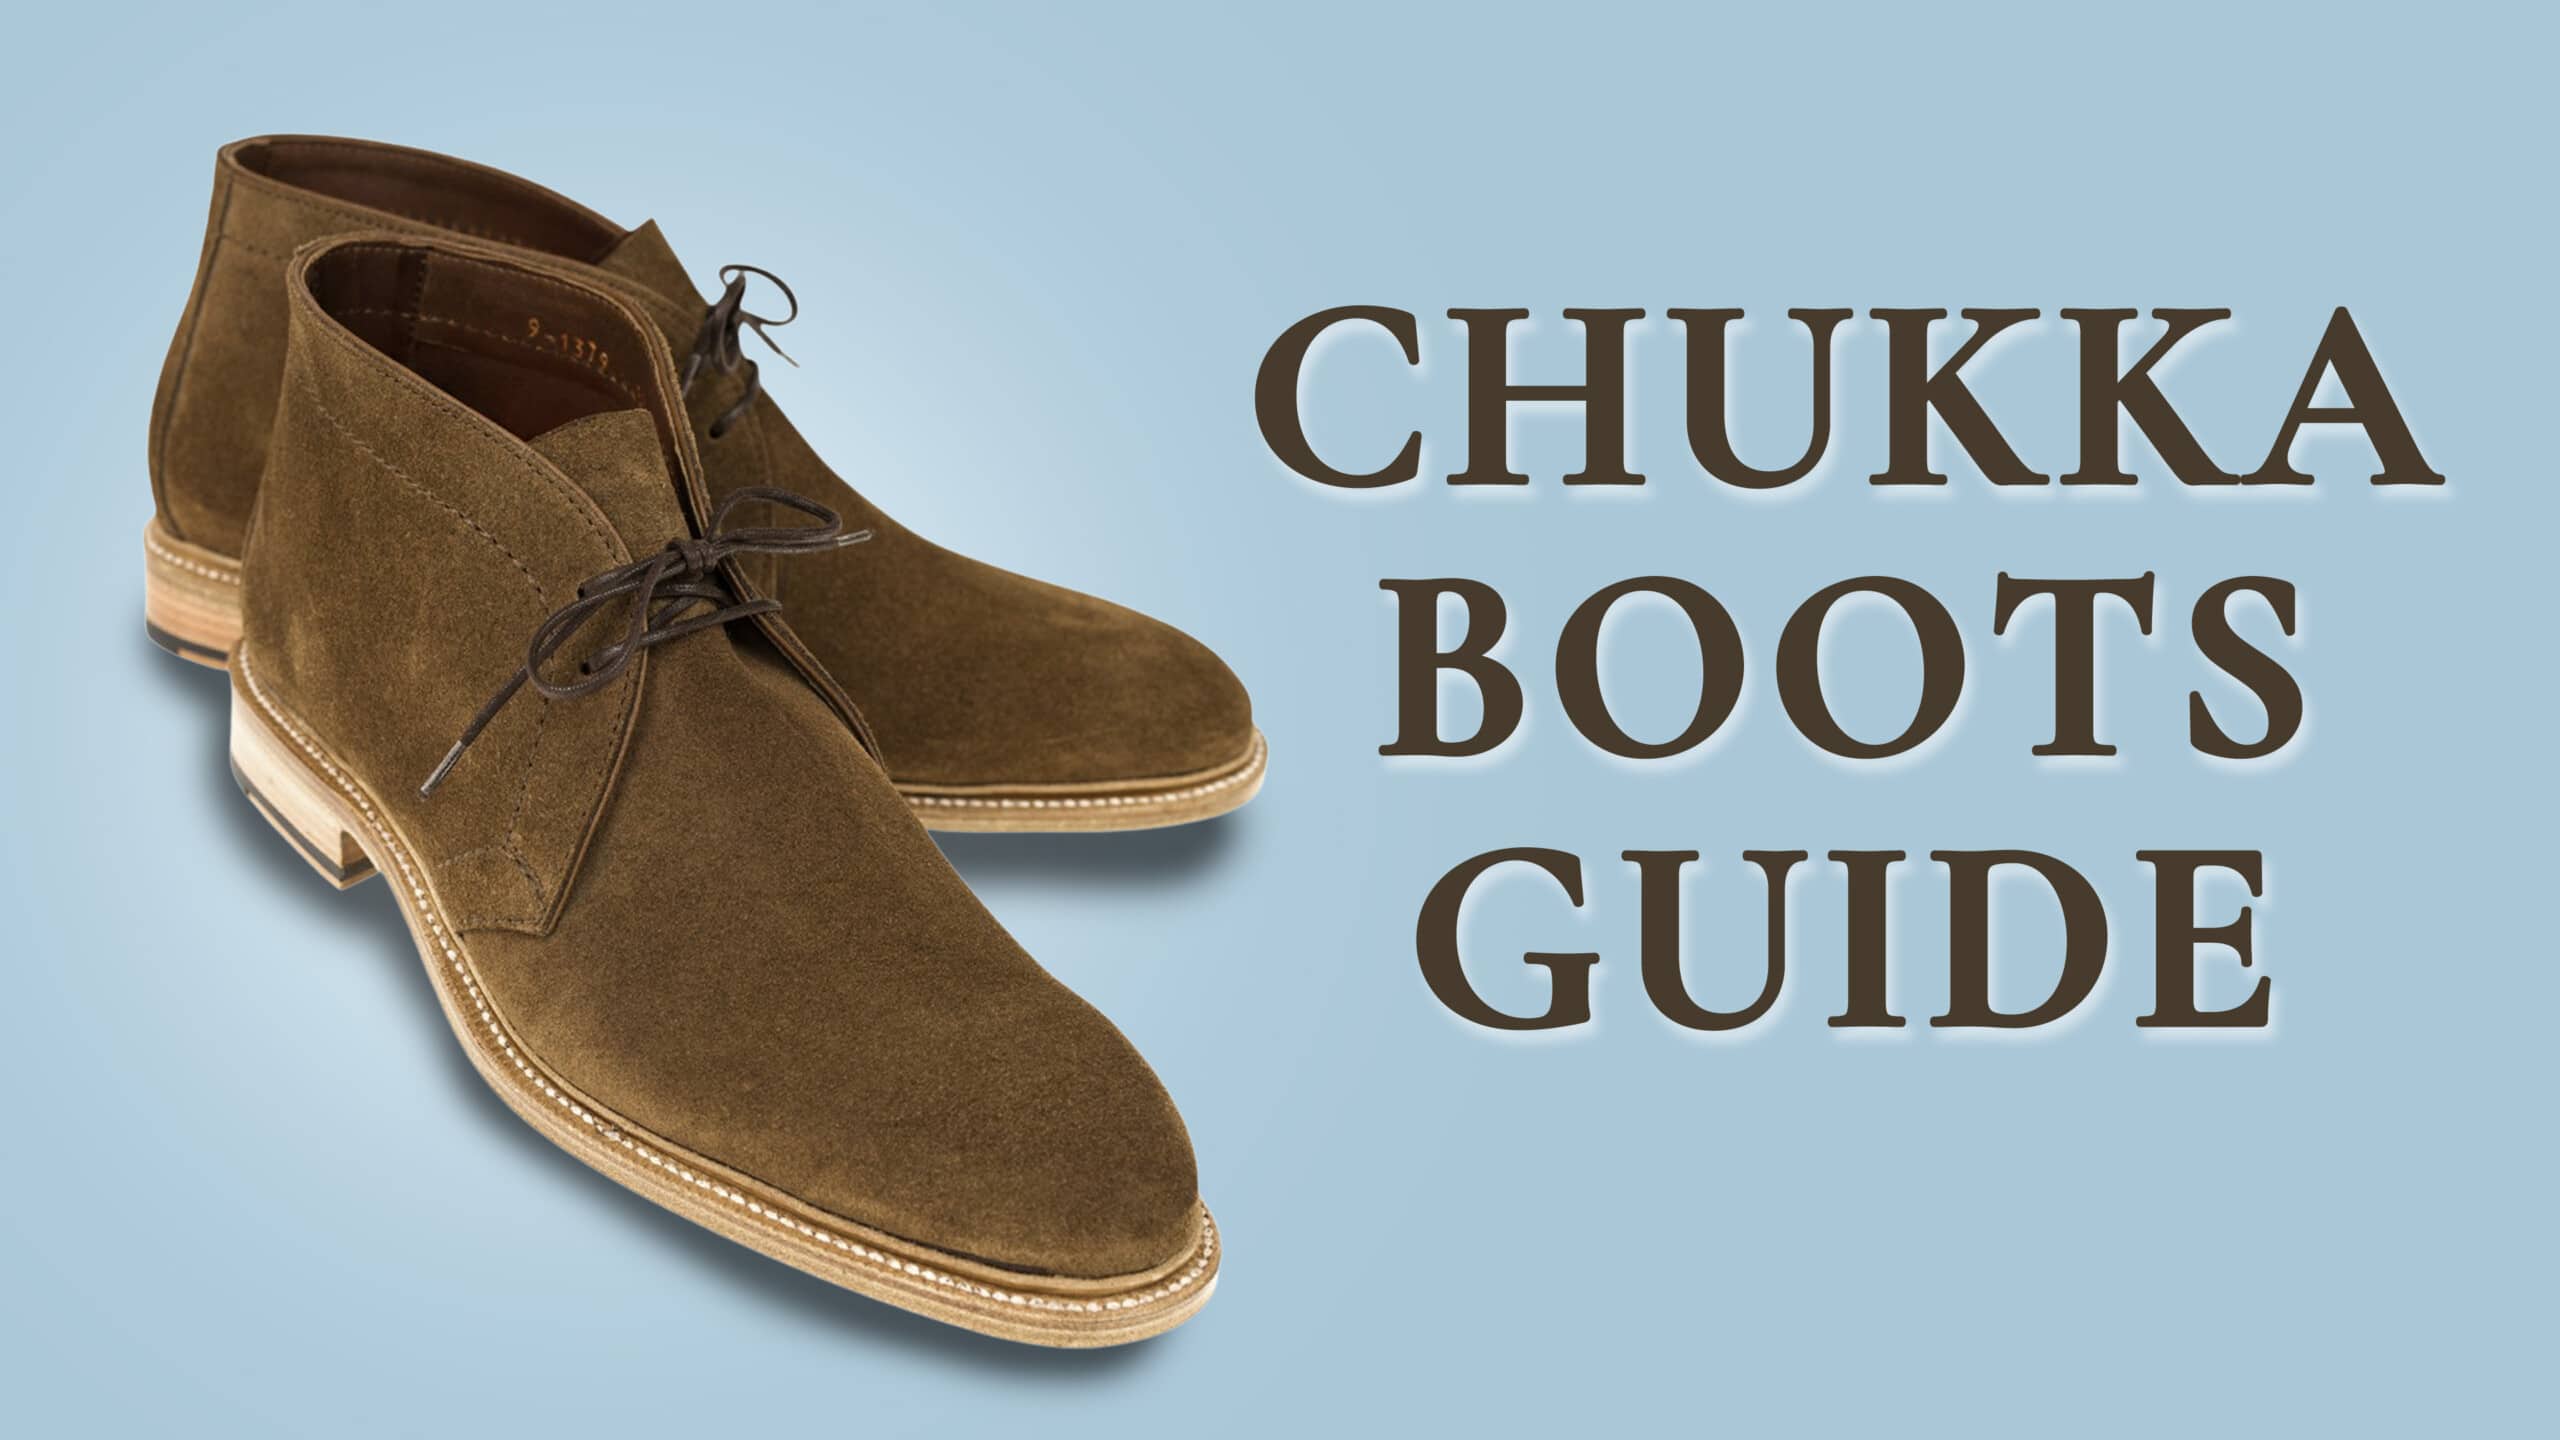 chukka boots guide 3840x2160 wp scaled